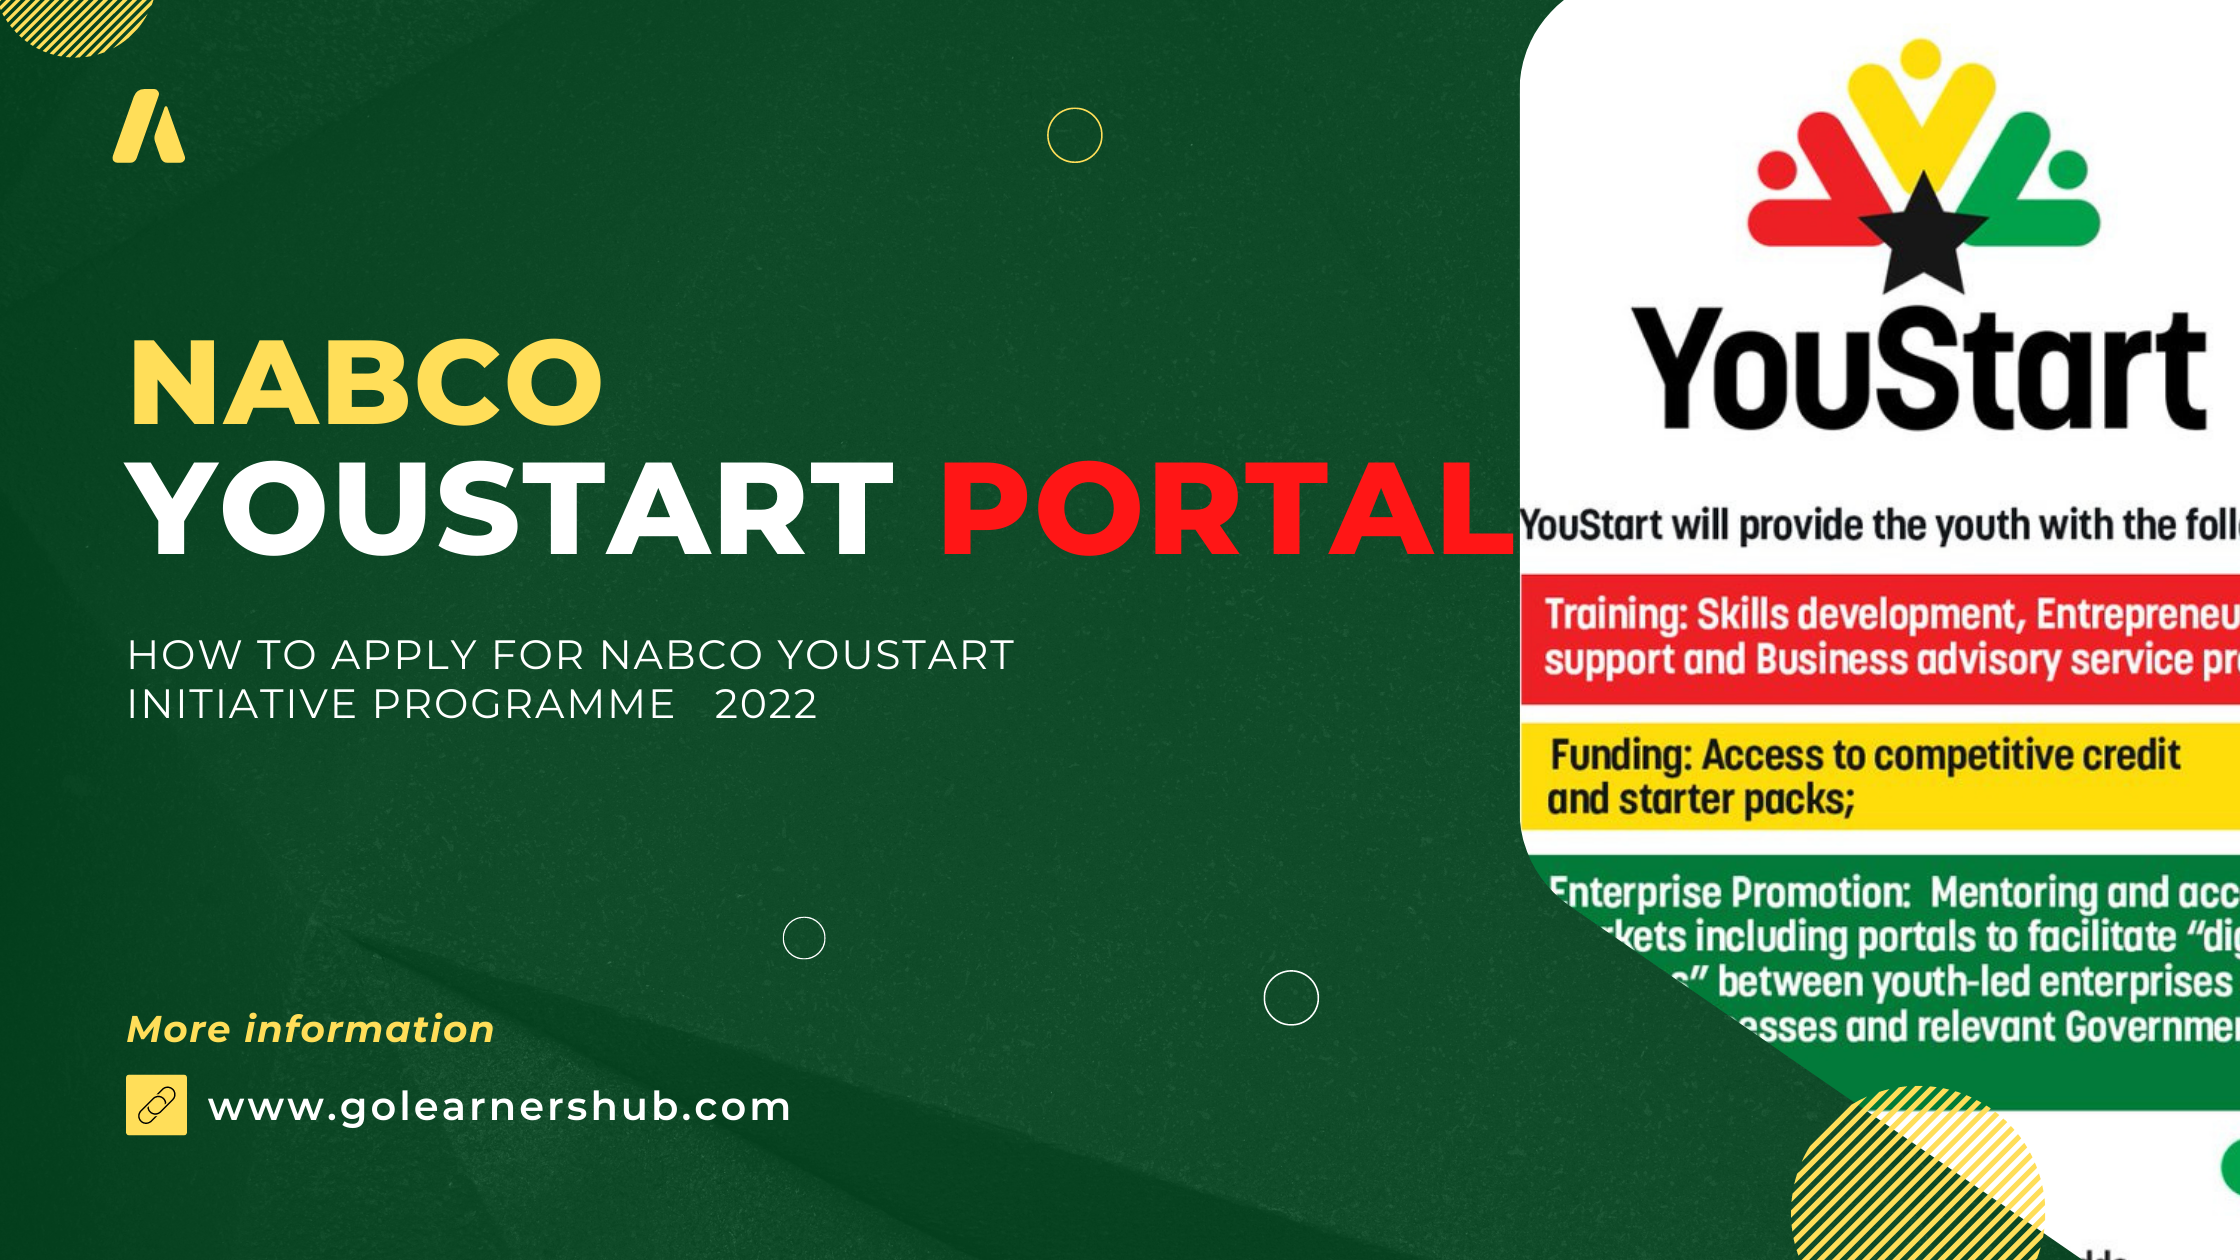 NABCO YouStart Application Portal, What's Entailed & How to Apply